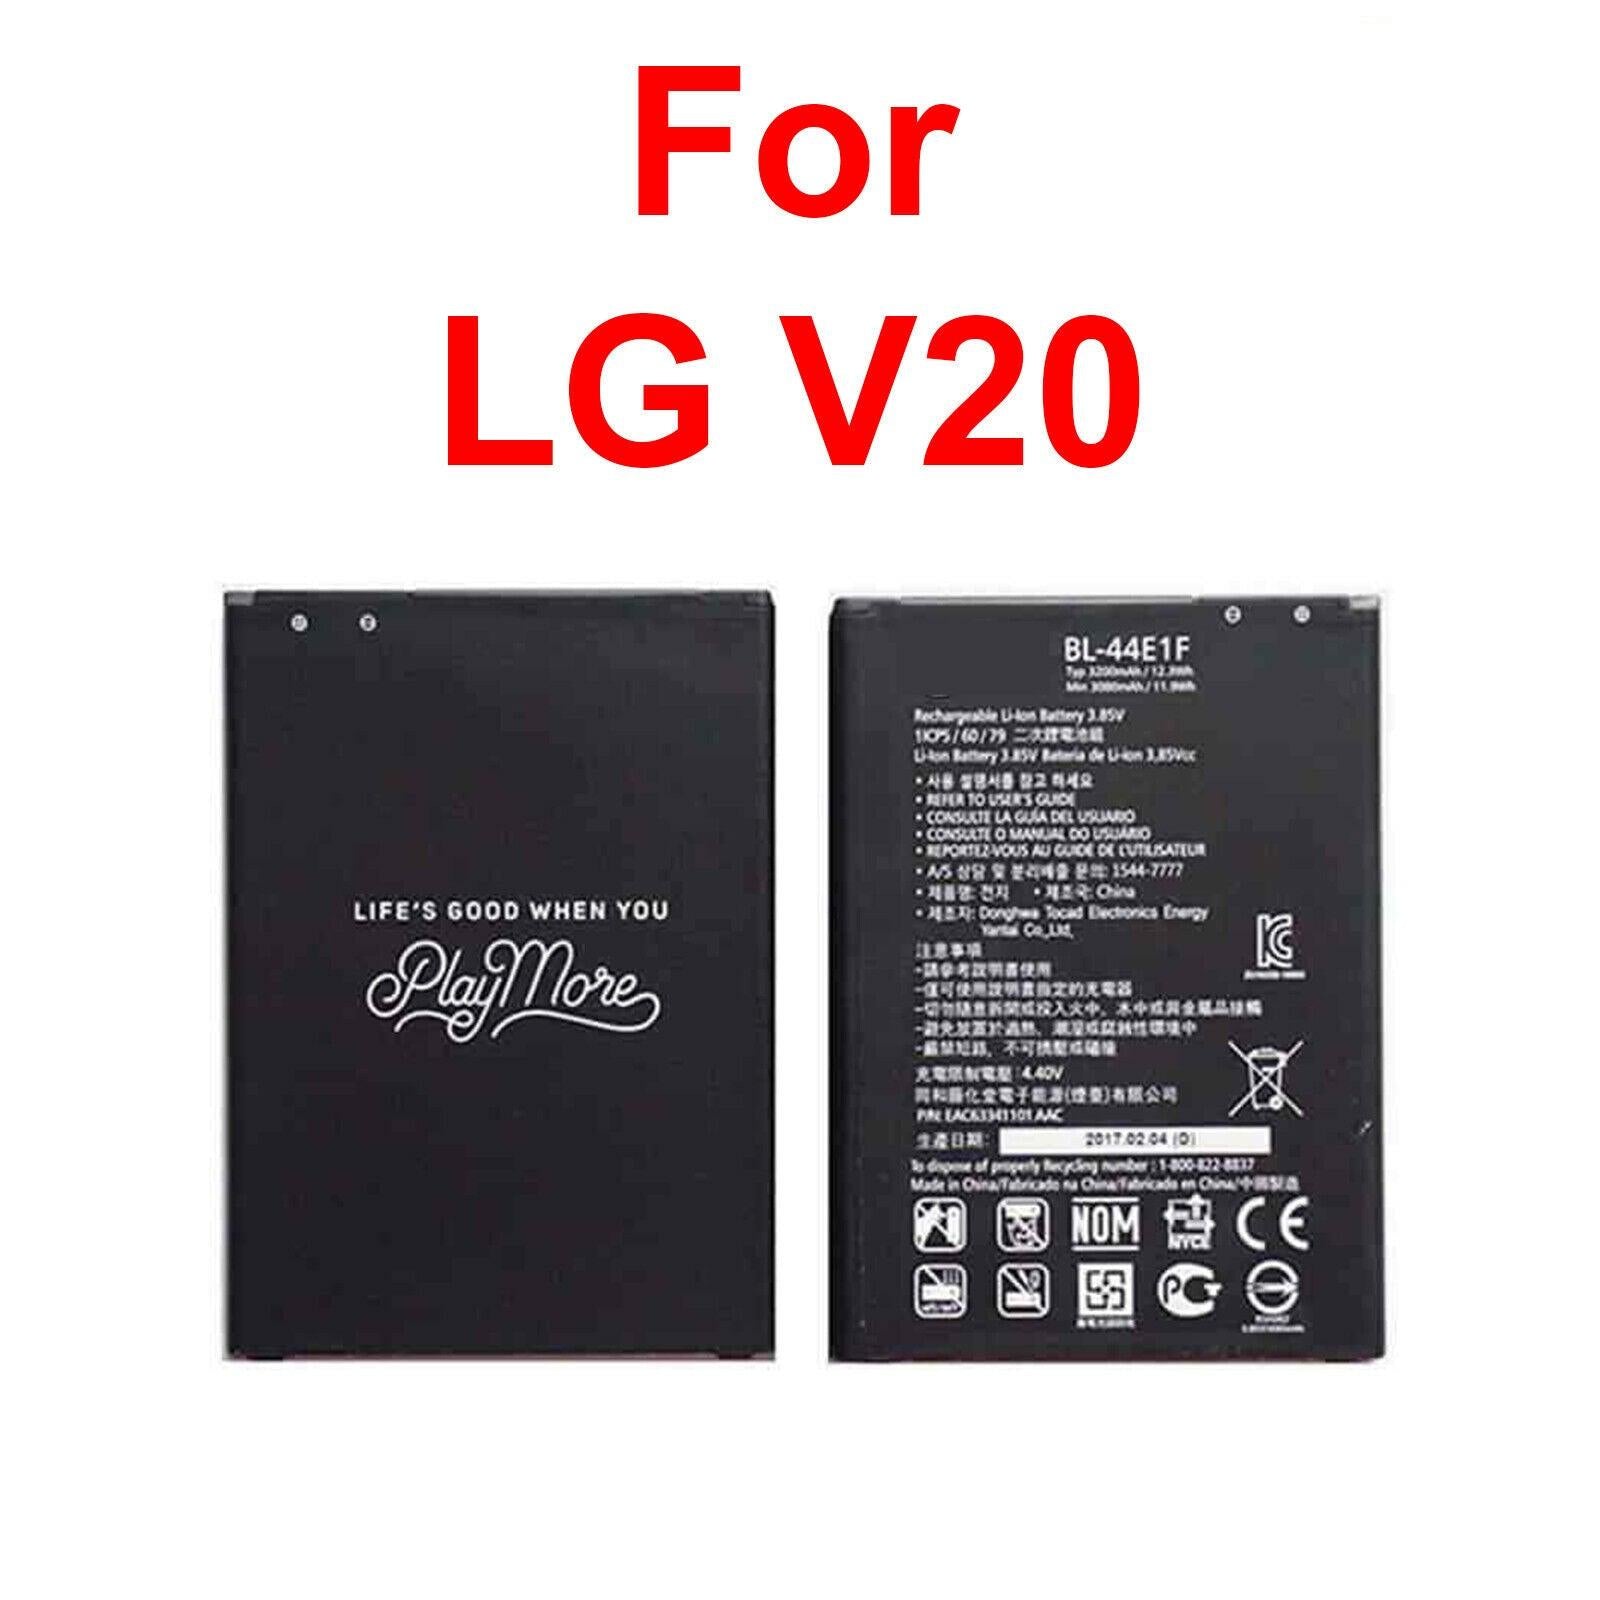 New Battery LG BL-44E1F For LG V20 Stylo 3 H910 H918 V995 LS997 Replacement A+ - Etyn Online {{ product_tag }}